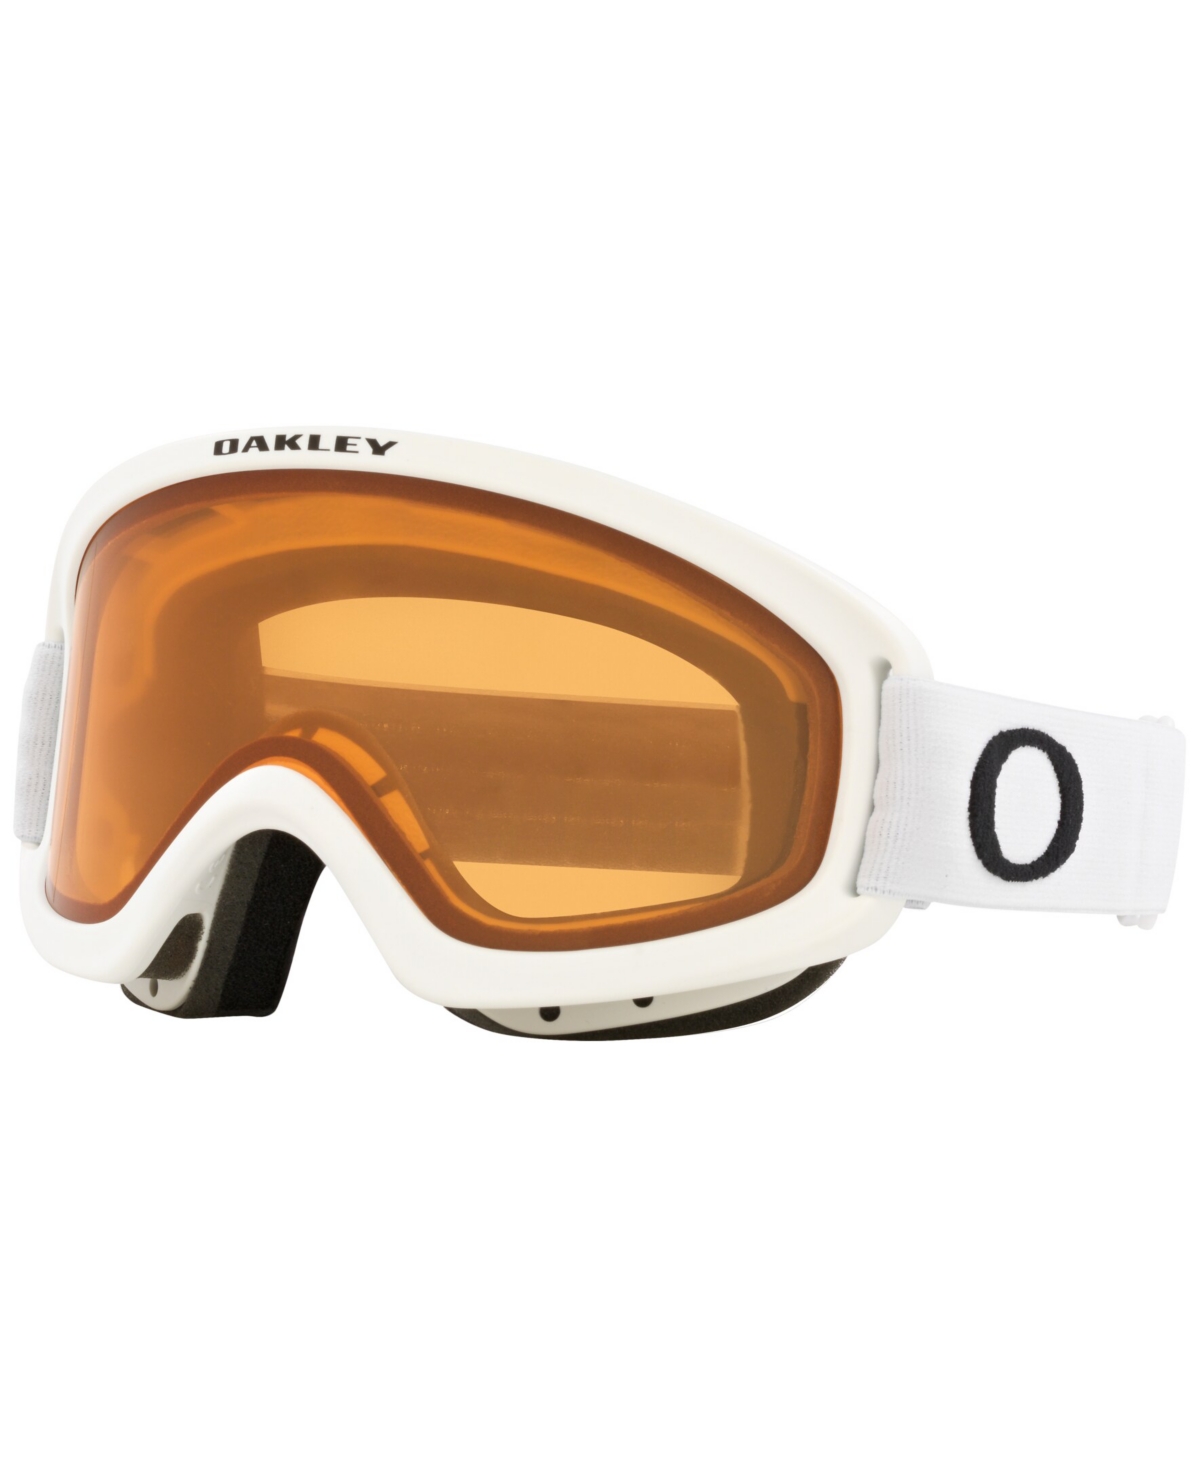 Oakley Unisex O-frame A 2.0 Pro S Snow Goggles, Oo7126-03 In Matte White